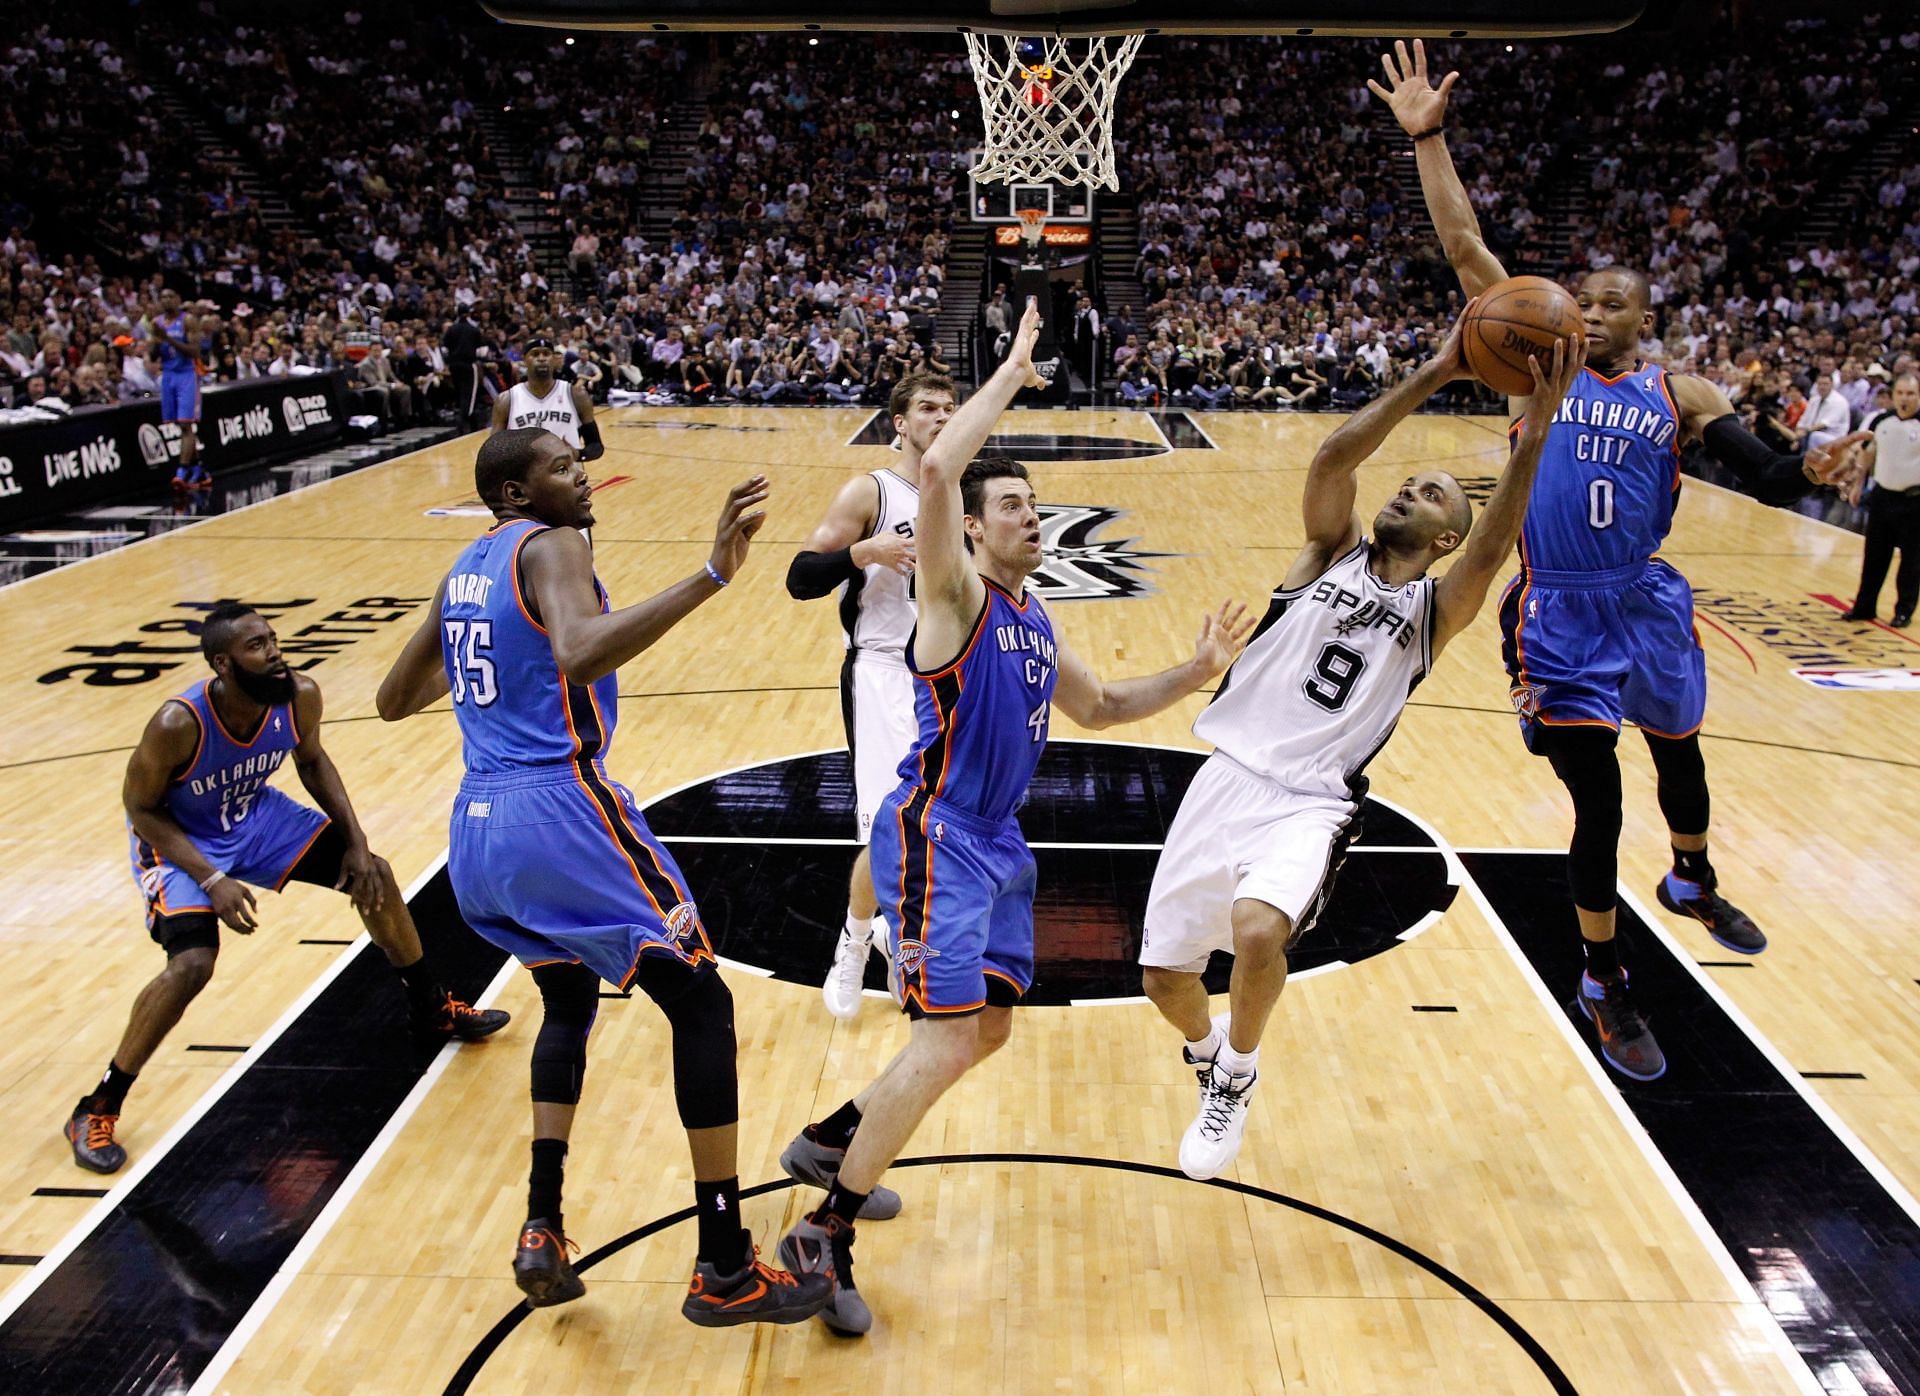 Tony Parker #9 of the San Antonio Spurs goes up for a shot in front of Russell Westbrook #0 of the Oklahoma City Thunder